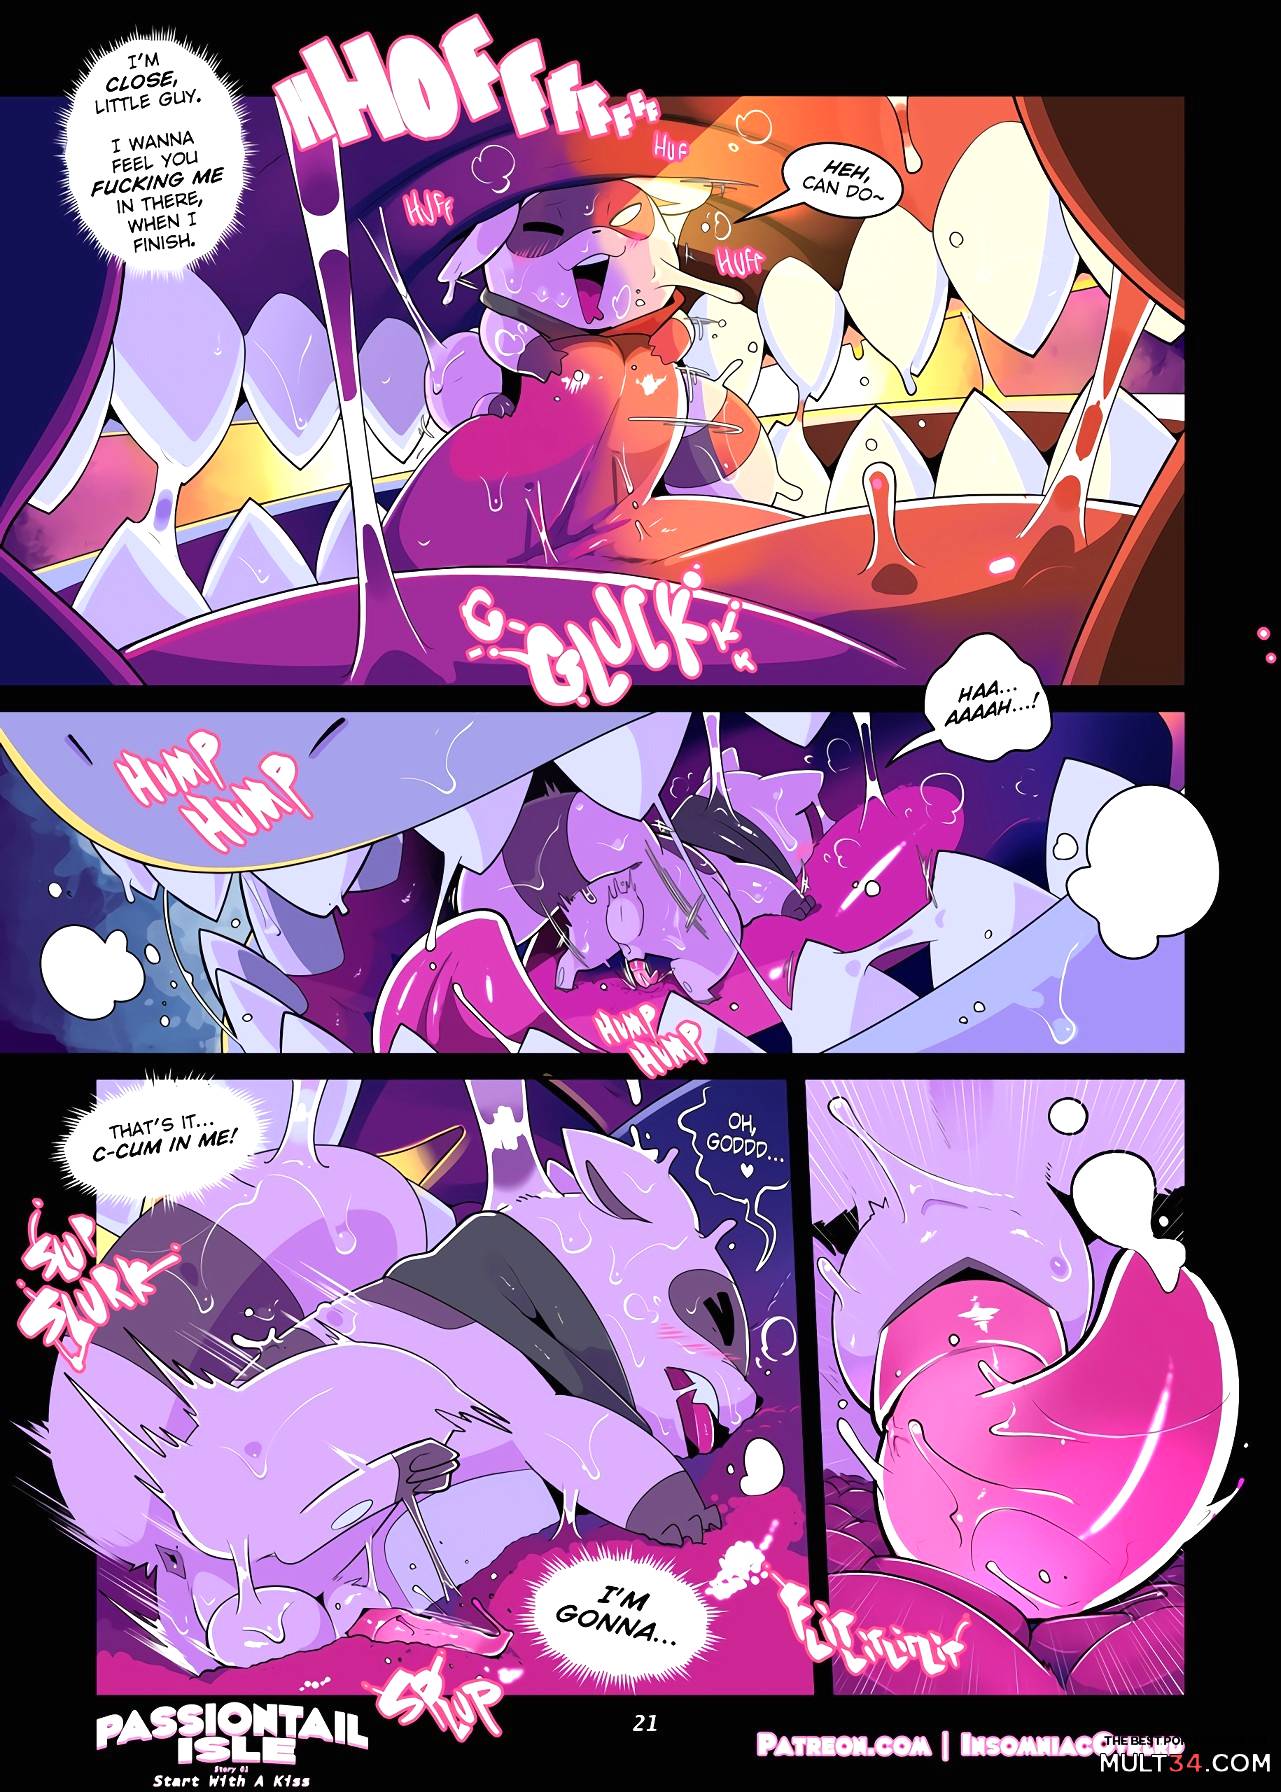 Passiontail Isle by Insomniacovrlrd page 23